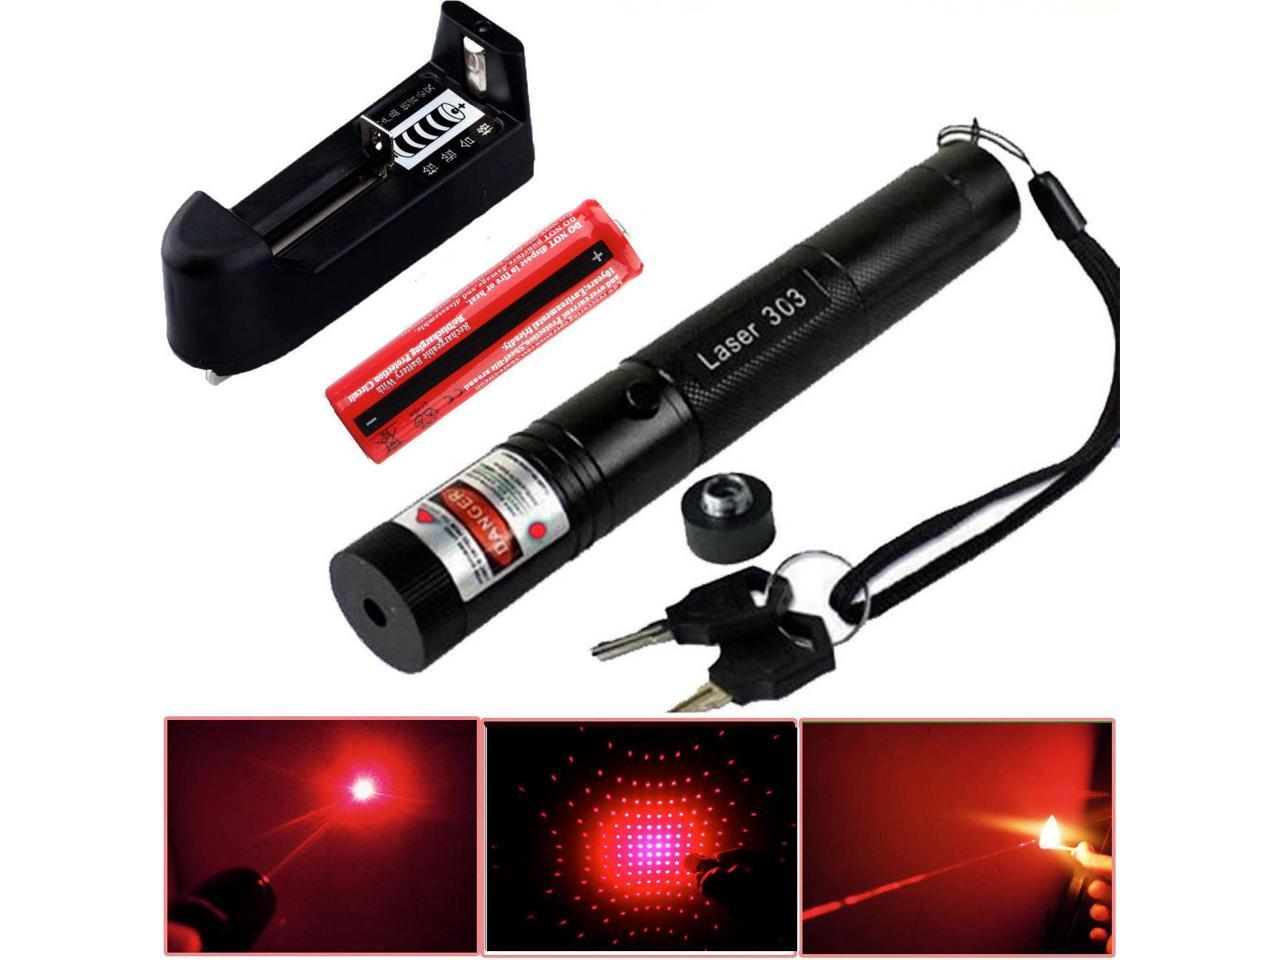 Military 650nm 1mW Red Laser Pointer Pen Lazer High Powered Visible Beam Light 